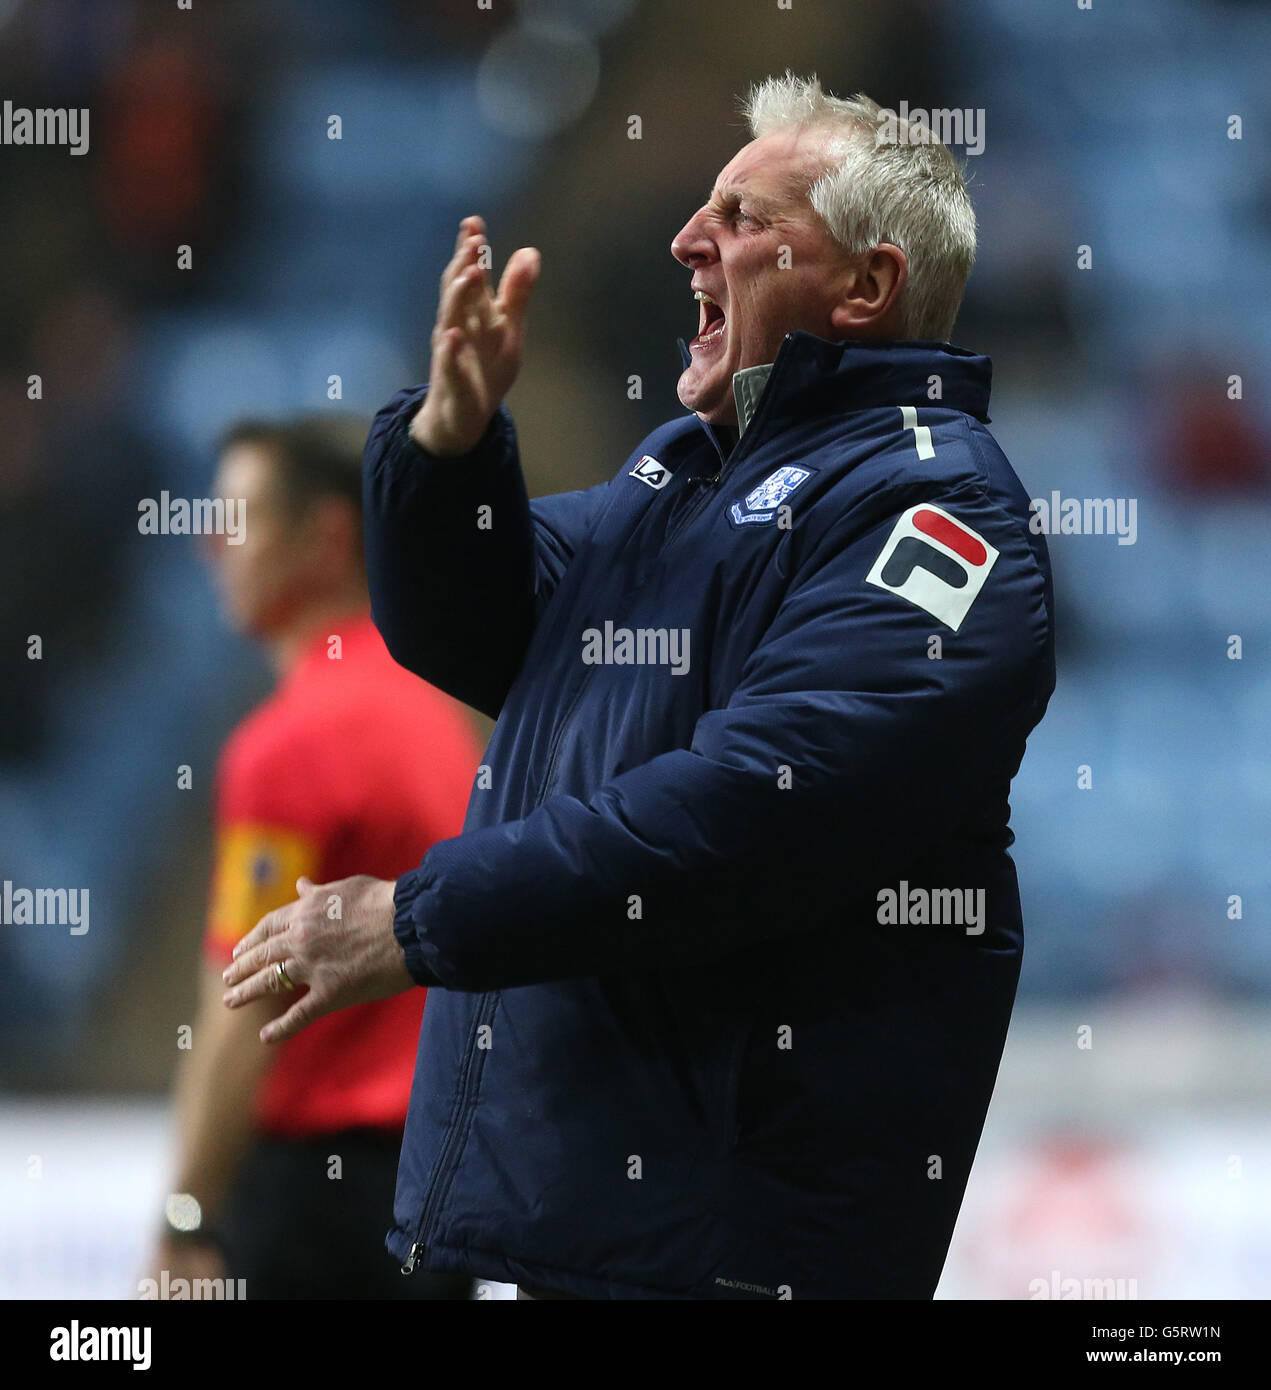 Soccer - npower Football League One - Coventry City v Tranmere Rovers - Ricoh Arena. Tranmere Rovers' manager Ronnie Moore screams at his players Stock Photo